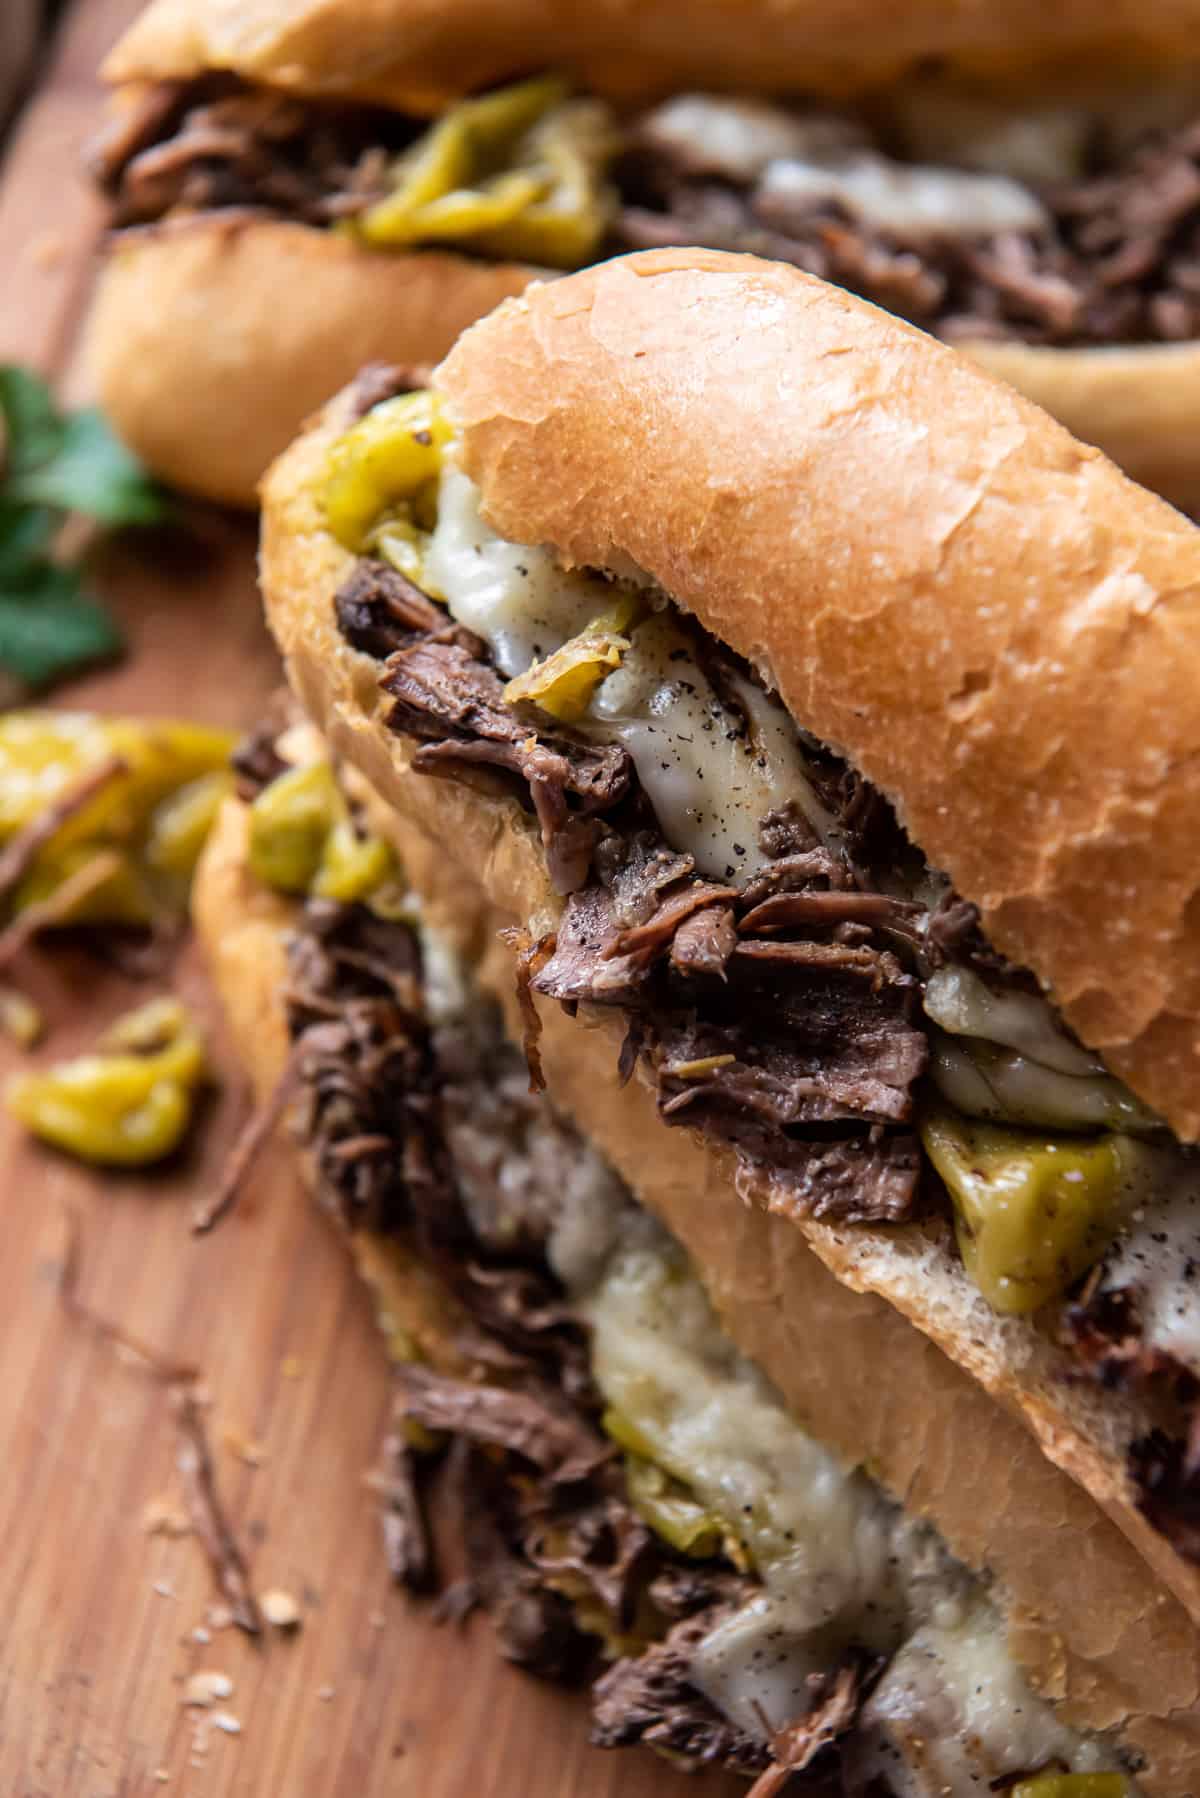 A close up of an Italian Beef Sandwich on a cutting board.